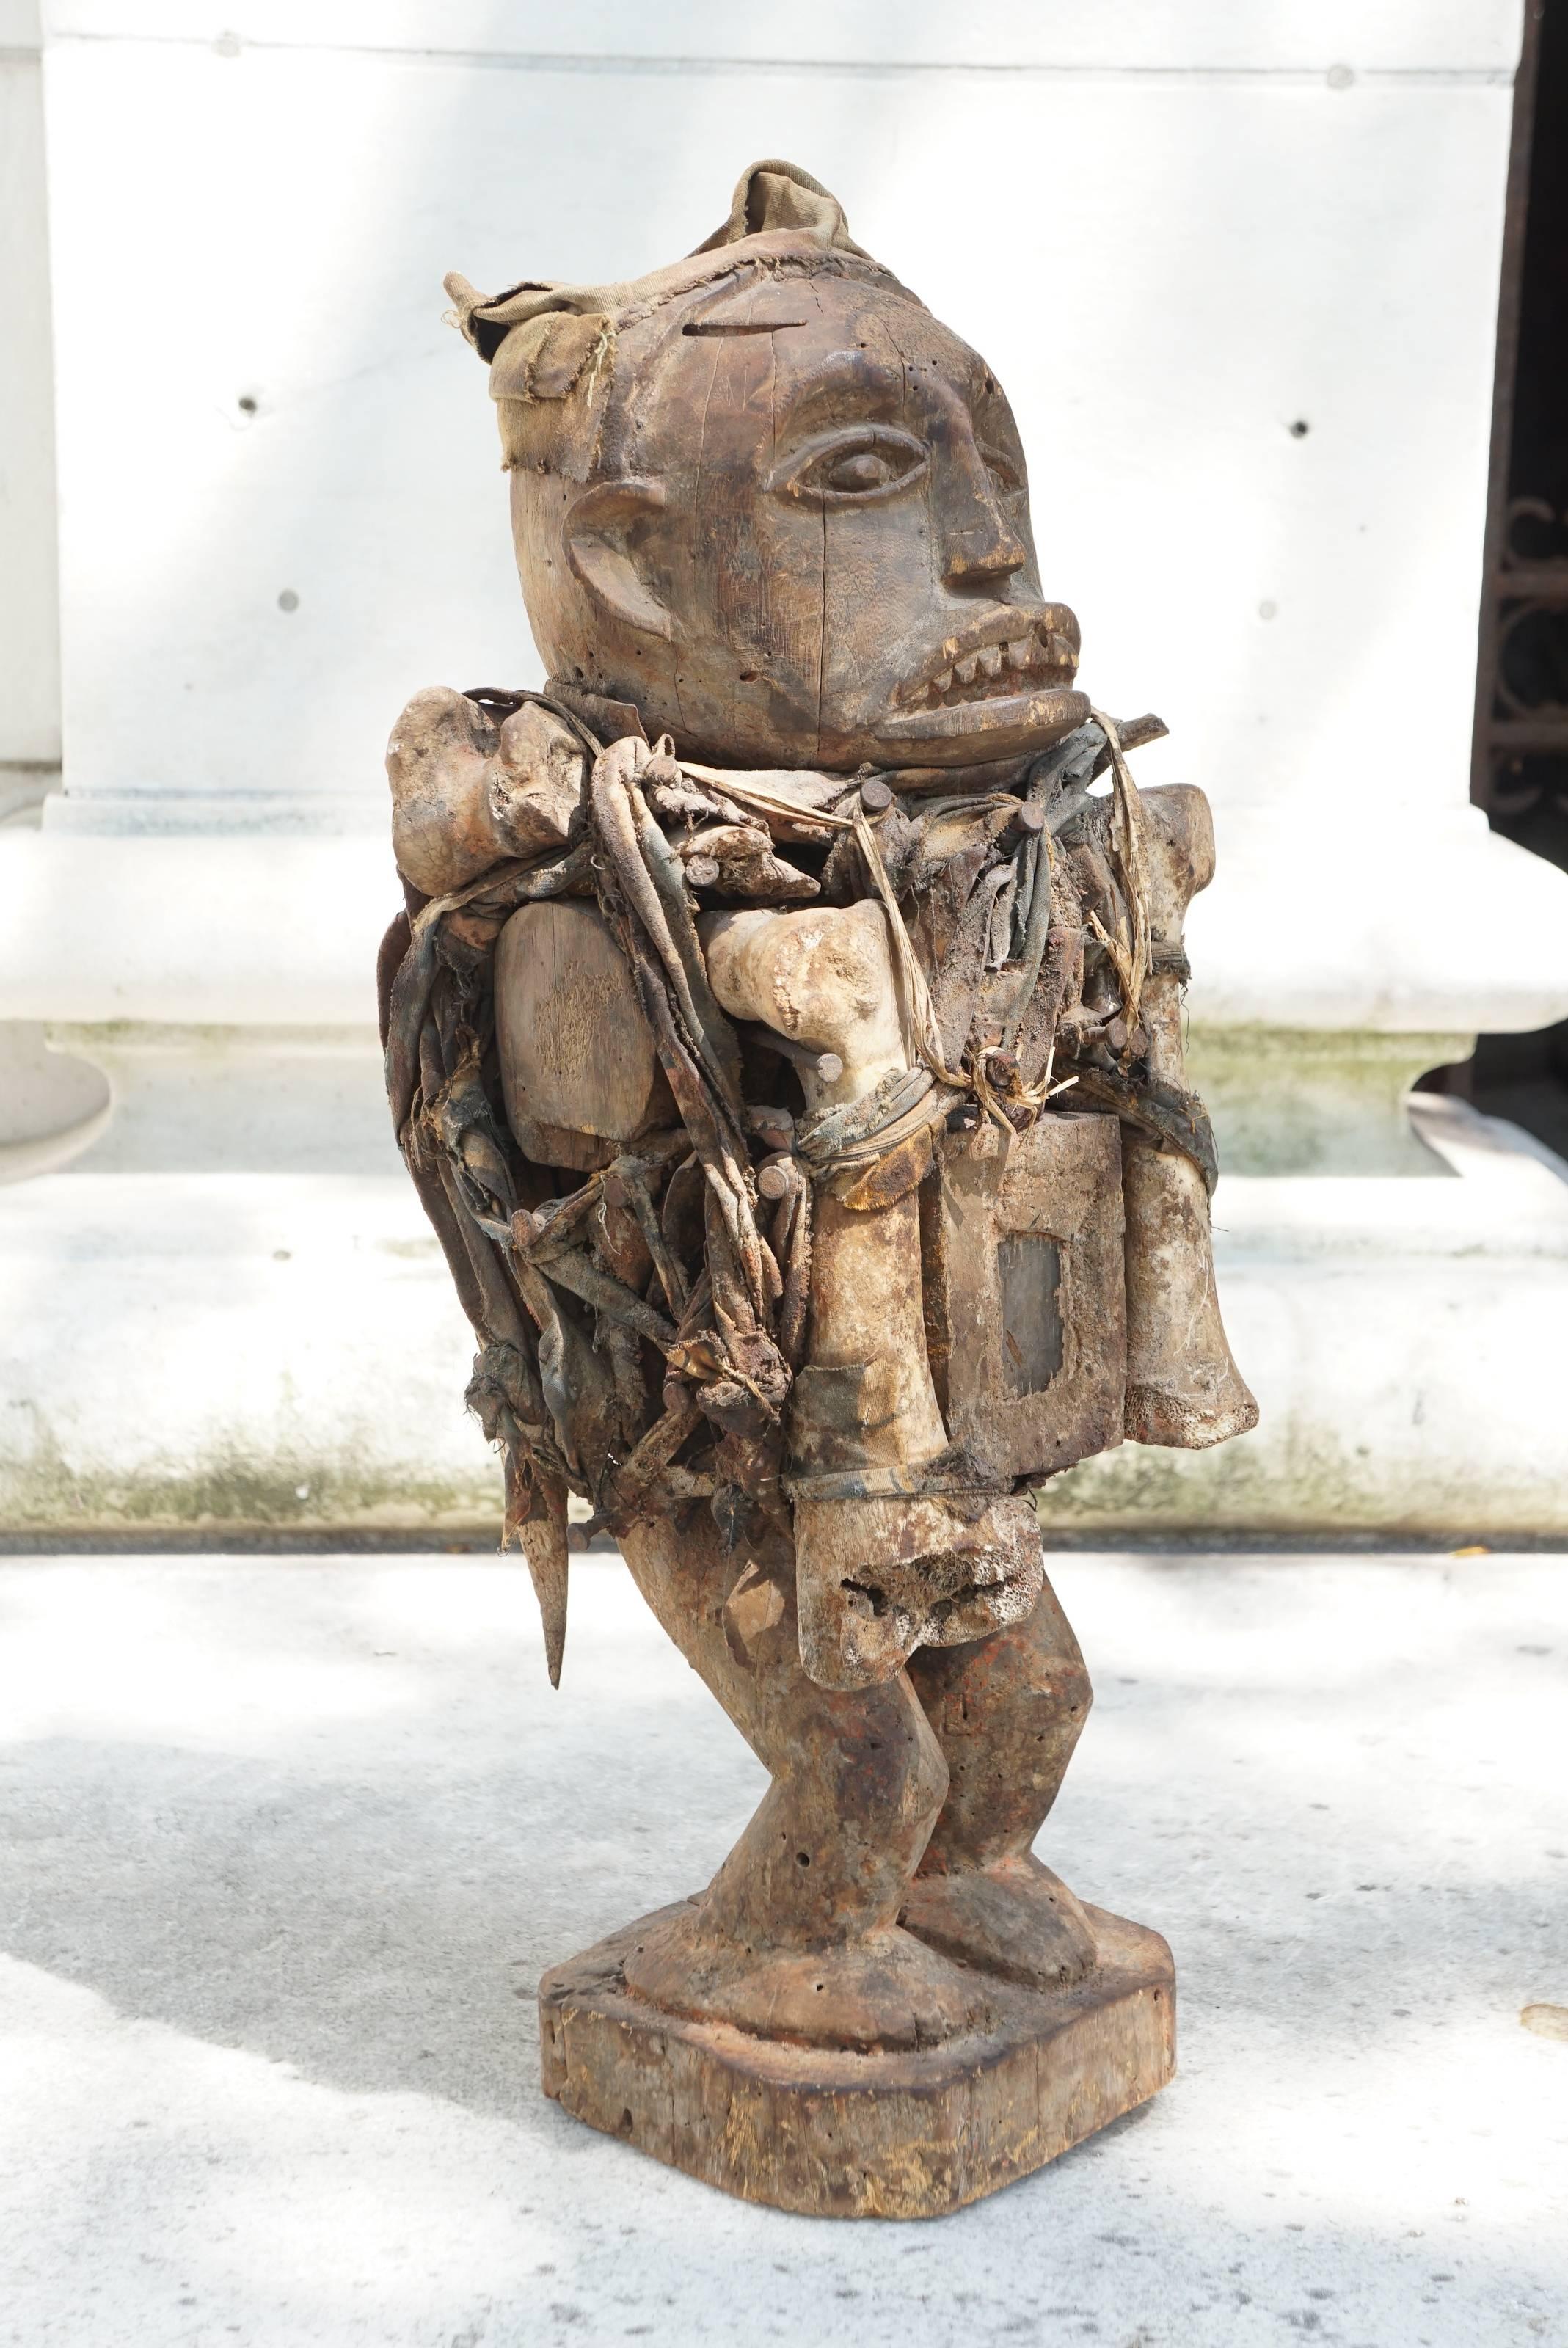 This large and finely carved comes from the Bakongo Peoples located within the Democratic Republic of the Congo. Made in the last days of the 19th century or early part of the 20th century boldly carved with a very dramatic face this figure and all